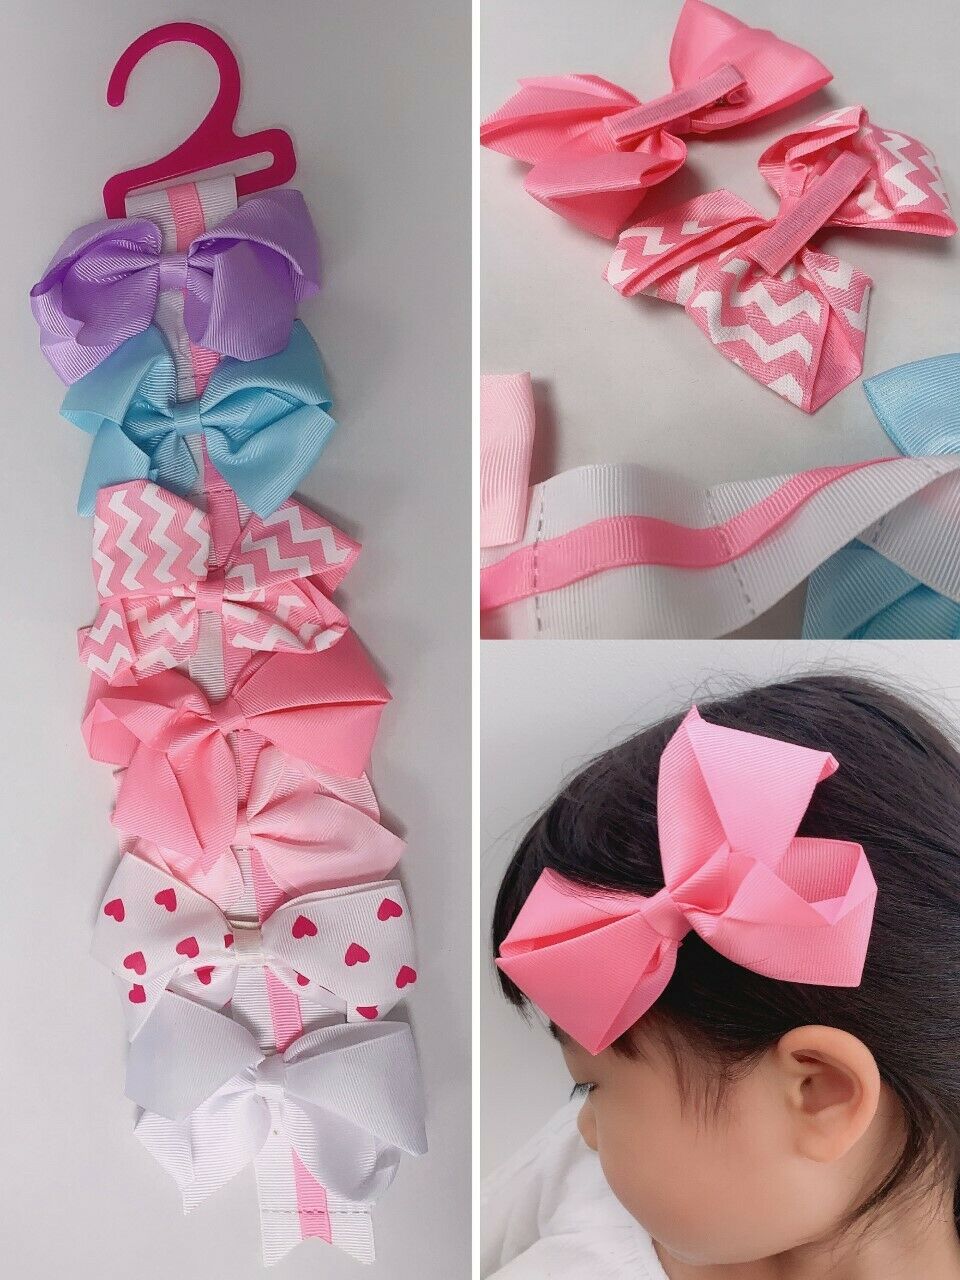 7 x Girls Children's Hair Bows Gift Set with Bow Holder and Dust Bag